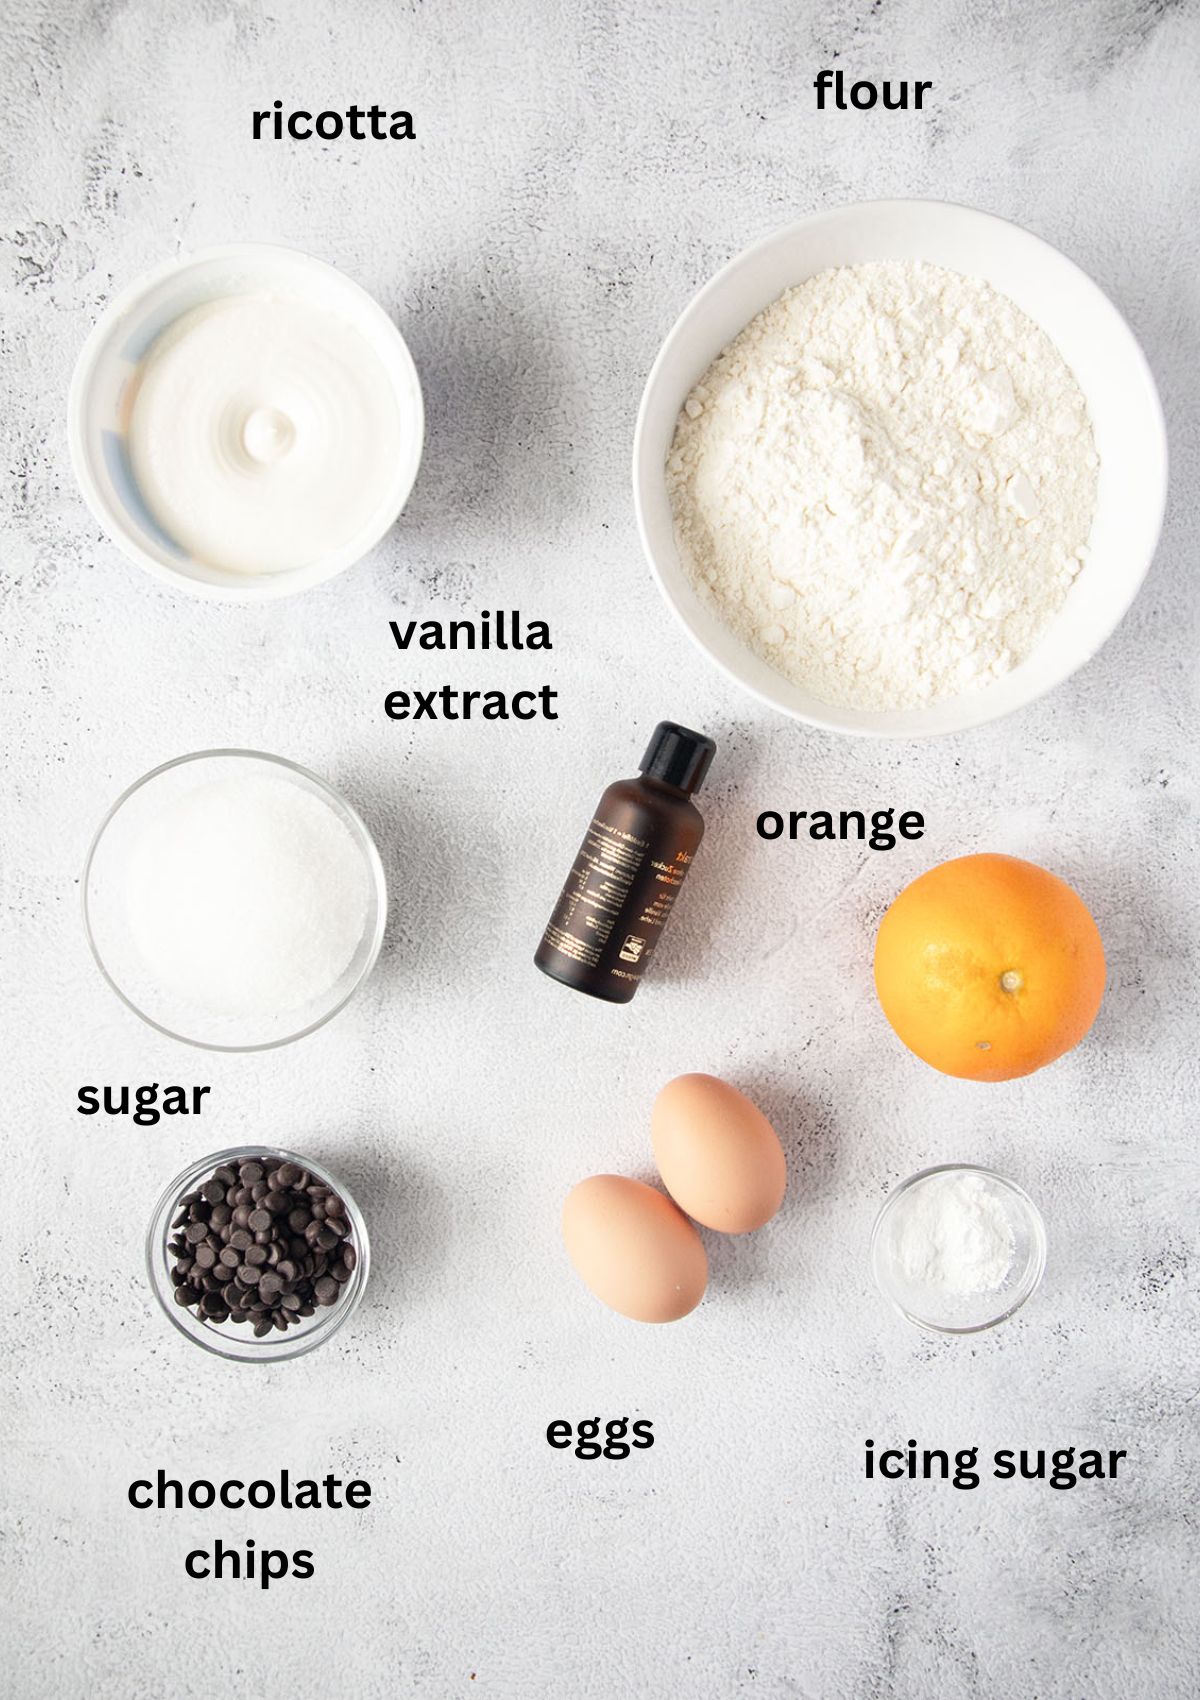 labeled ingredients for making ricotta cookies with chocolate chips and orange glaze.